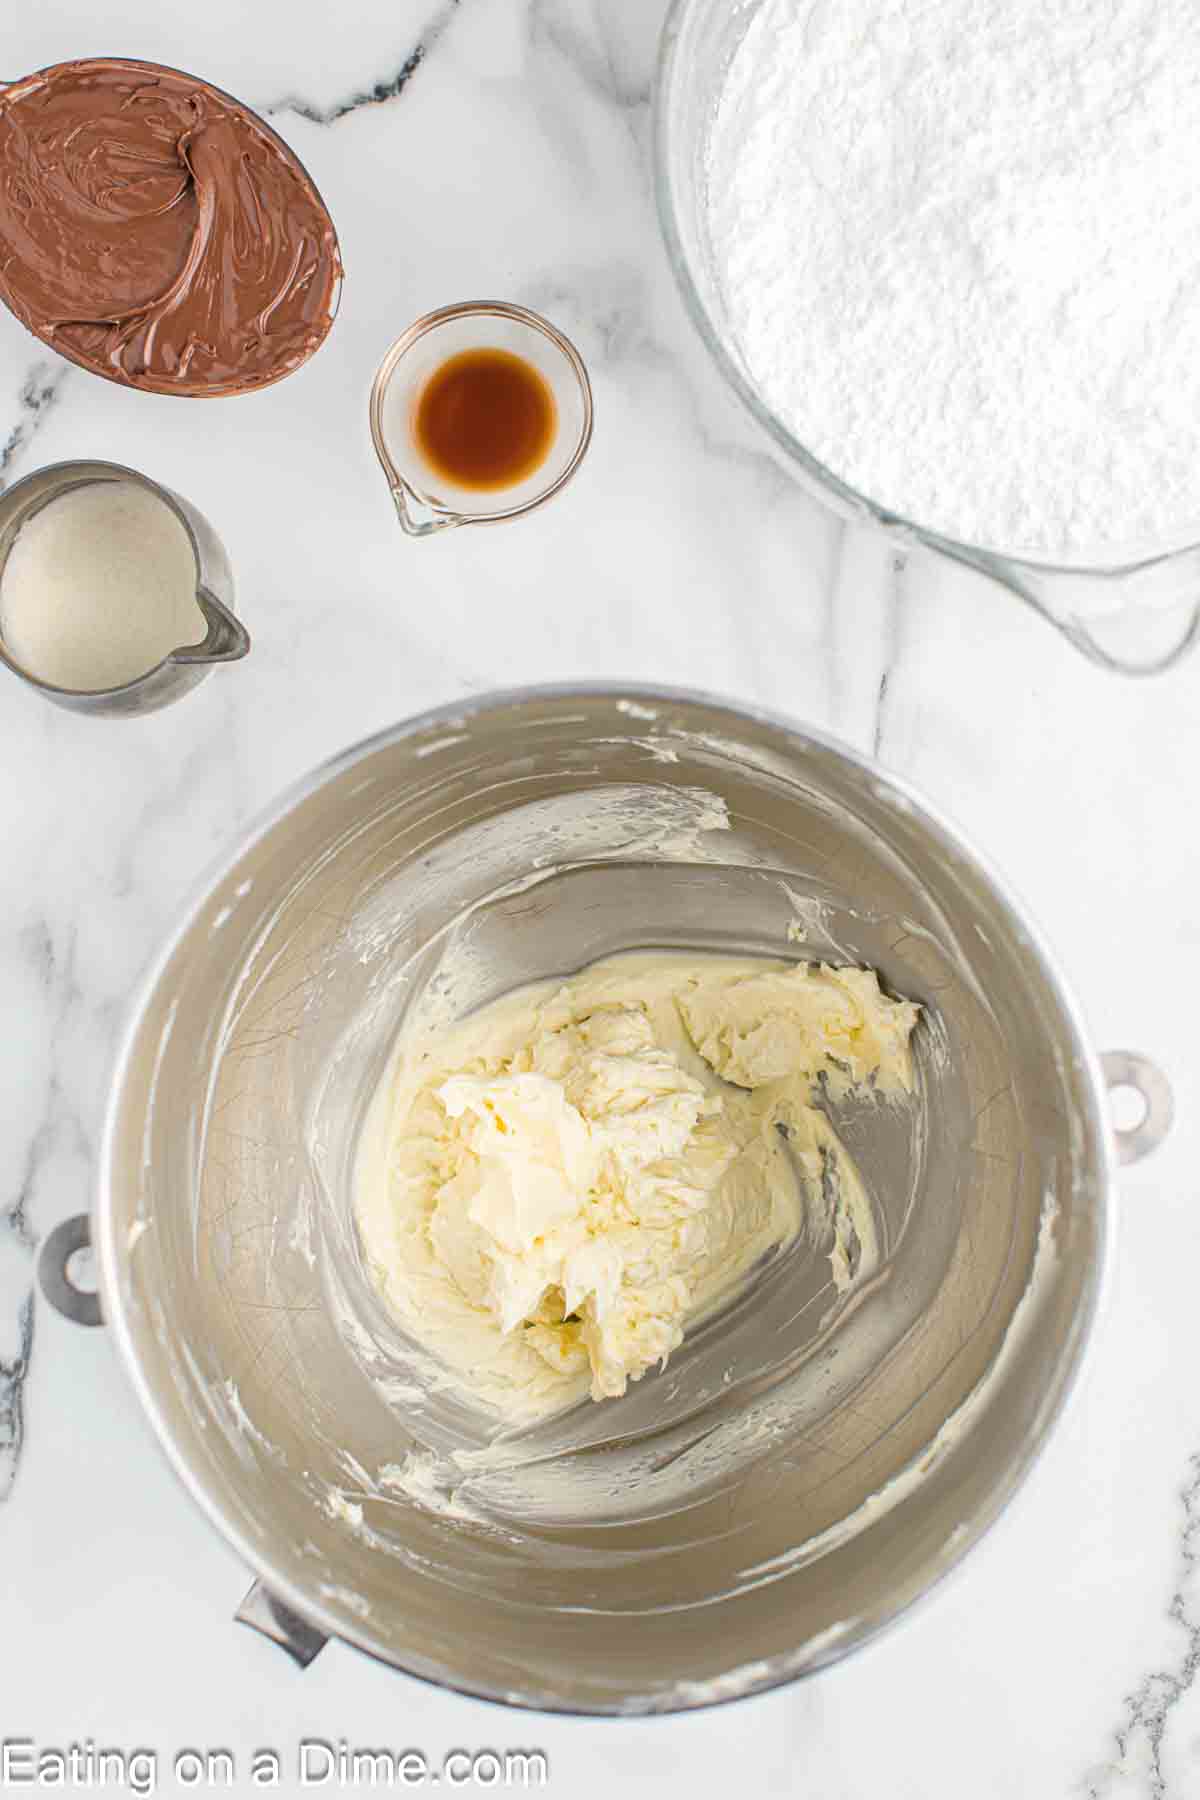 Beating butter in a stand mixer bowl